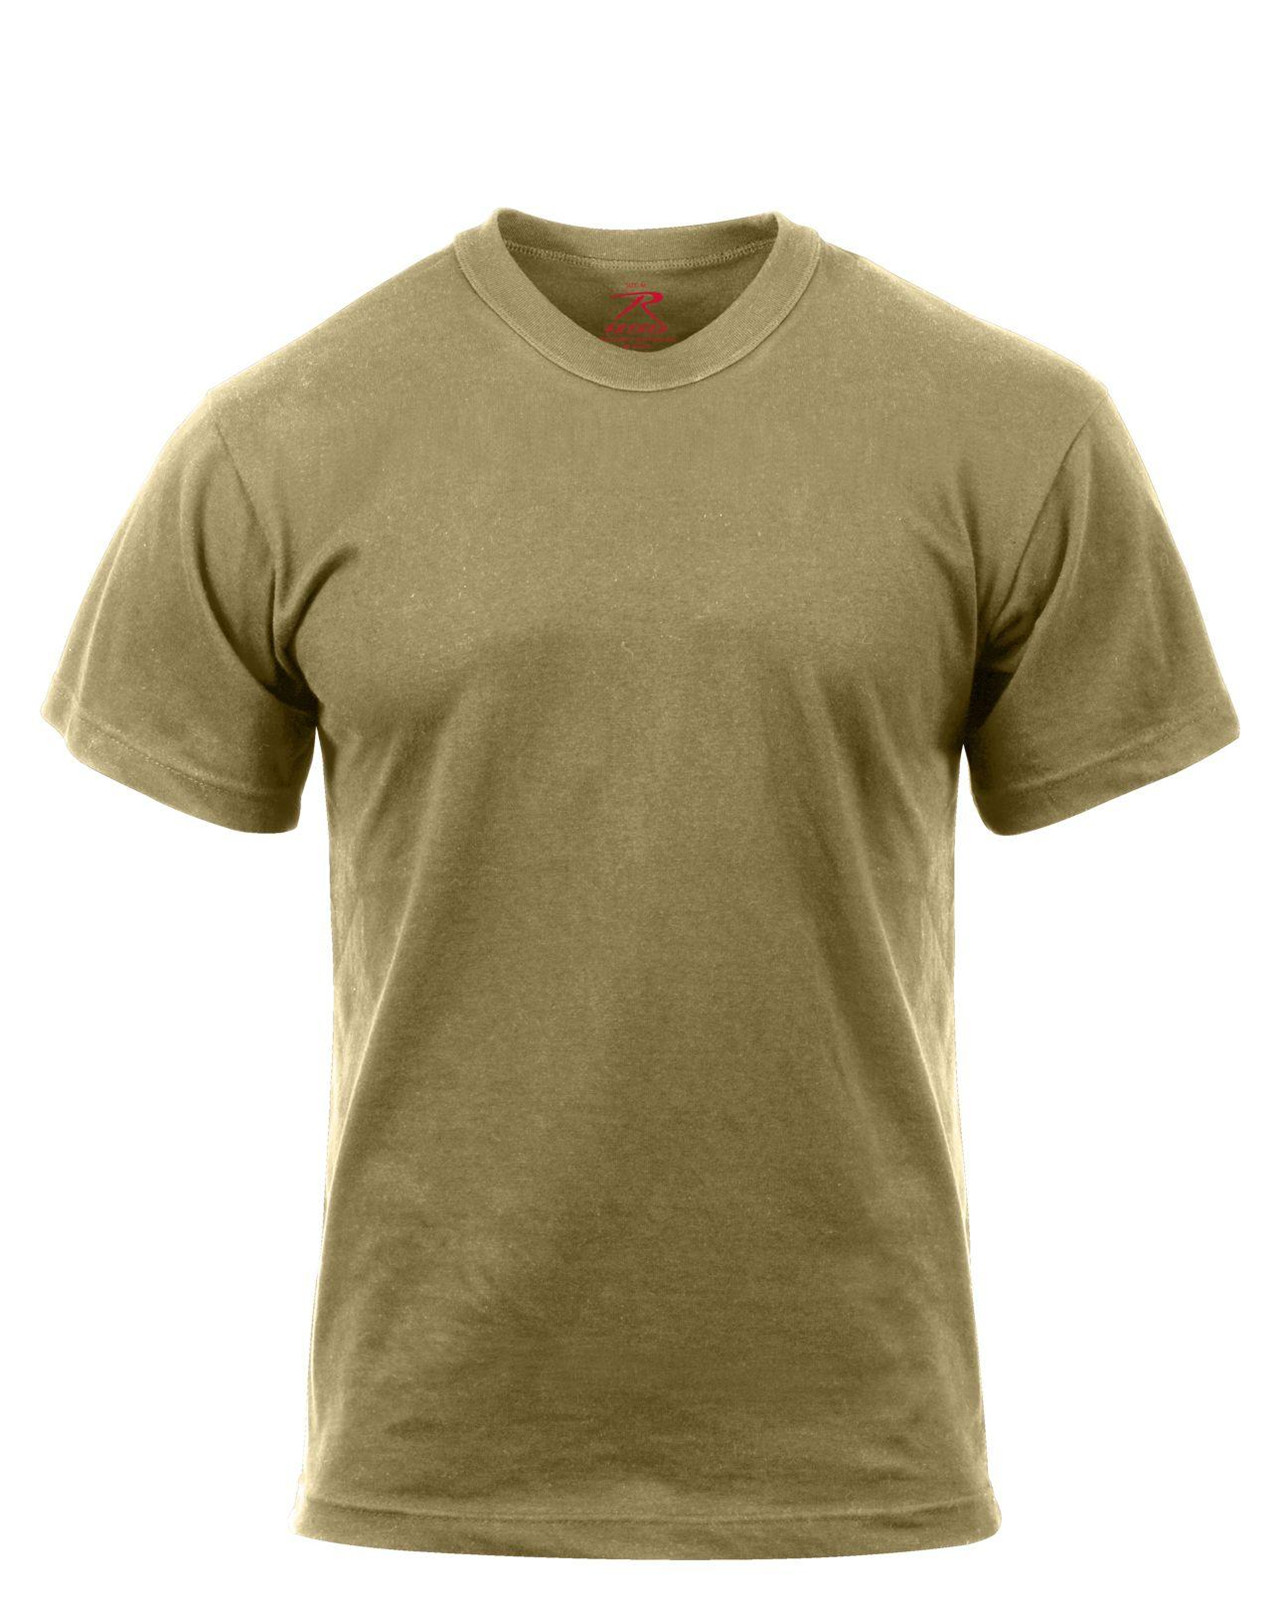 Rothco Bomulds T-Shirt (Coyote Brun, M)